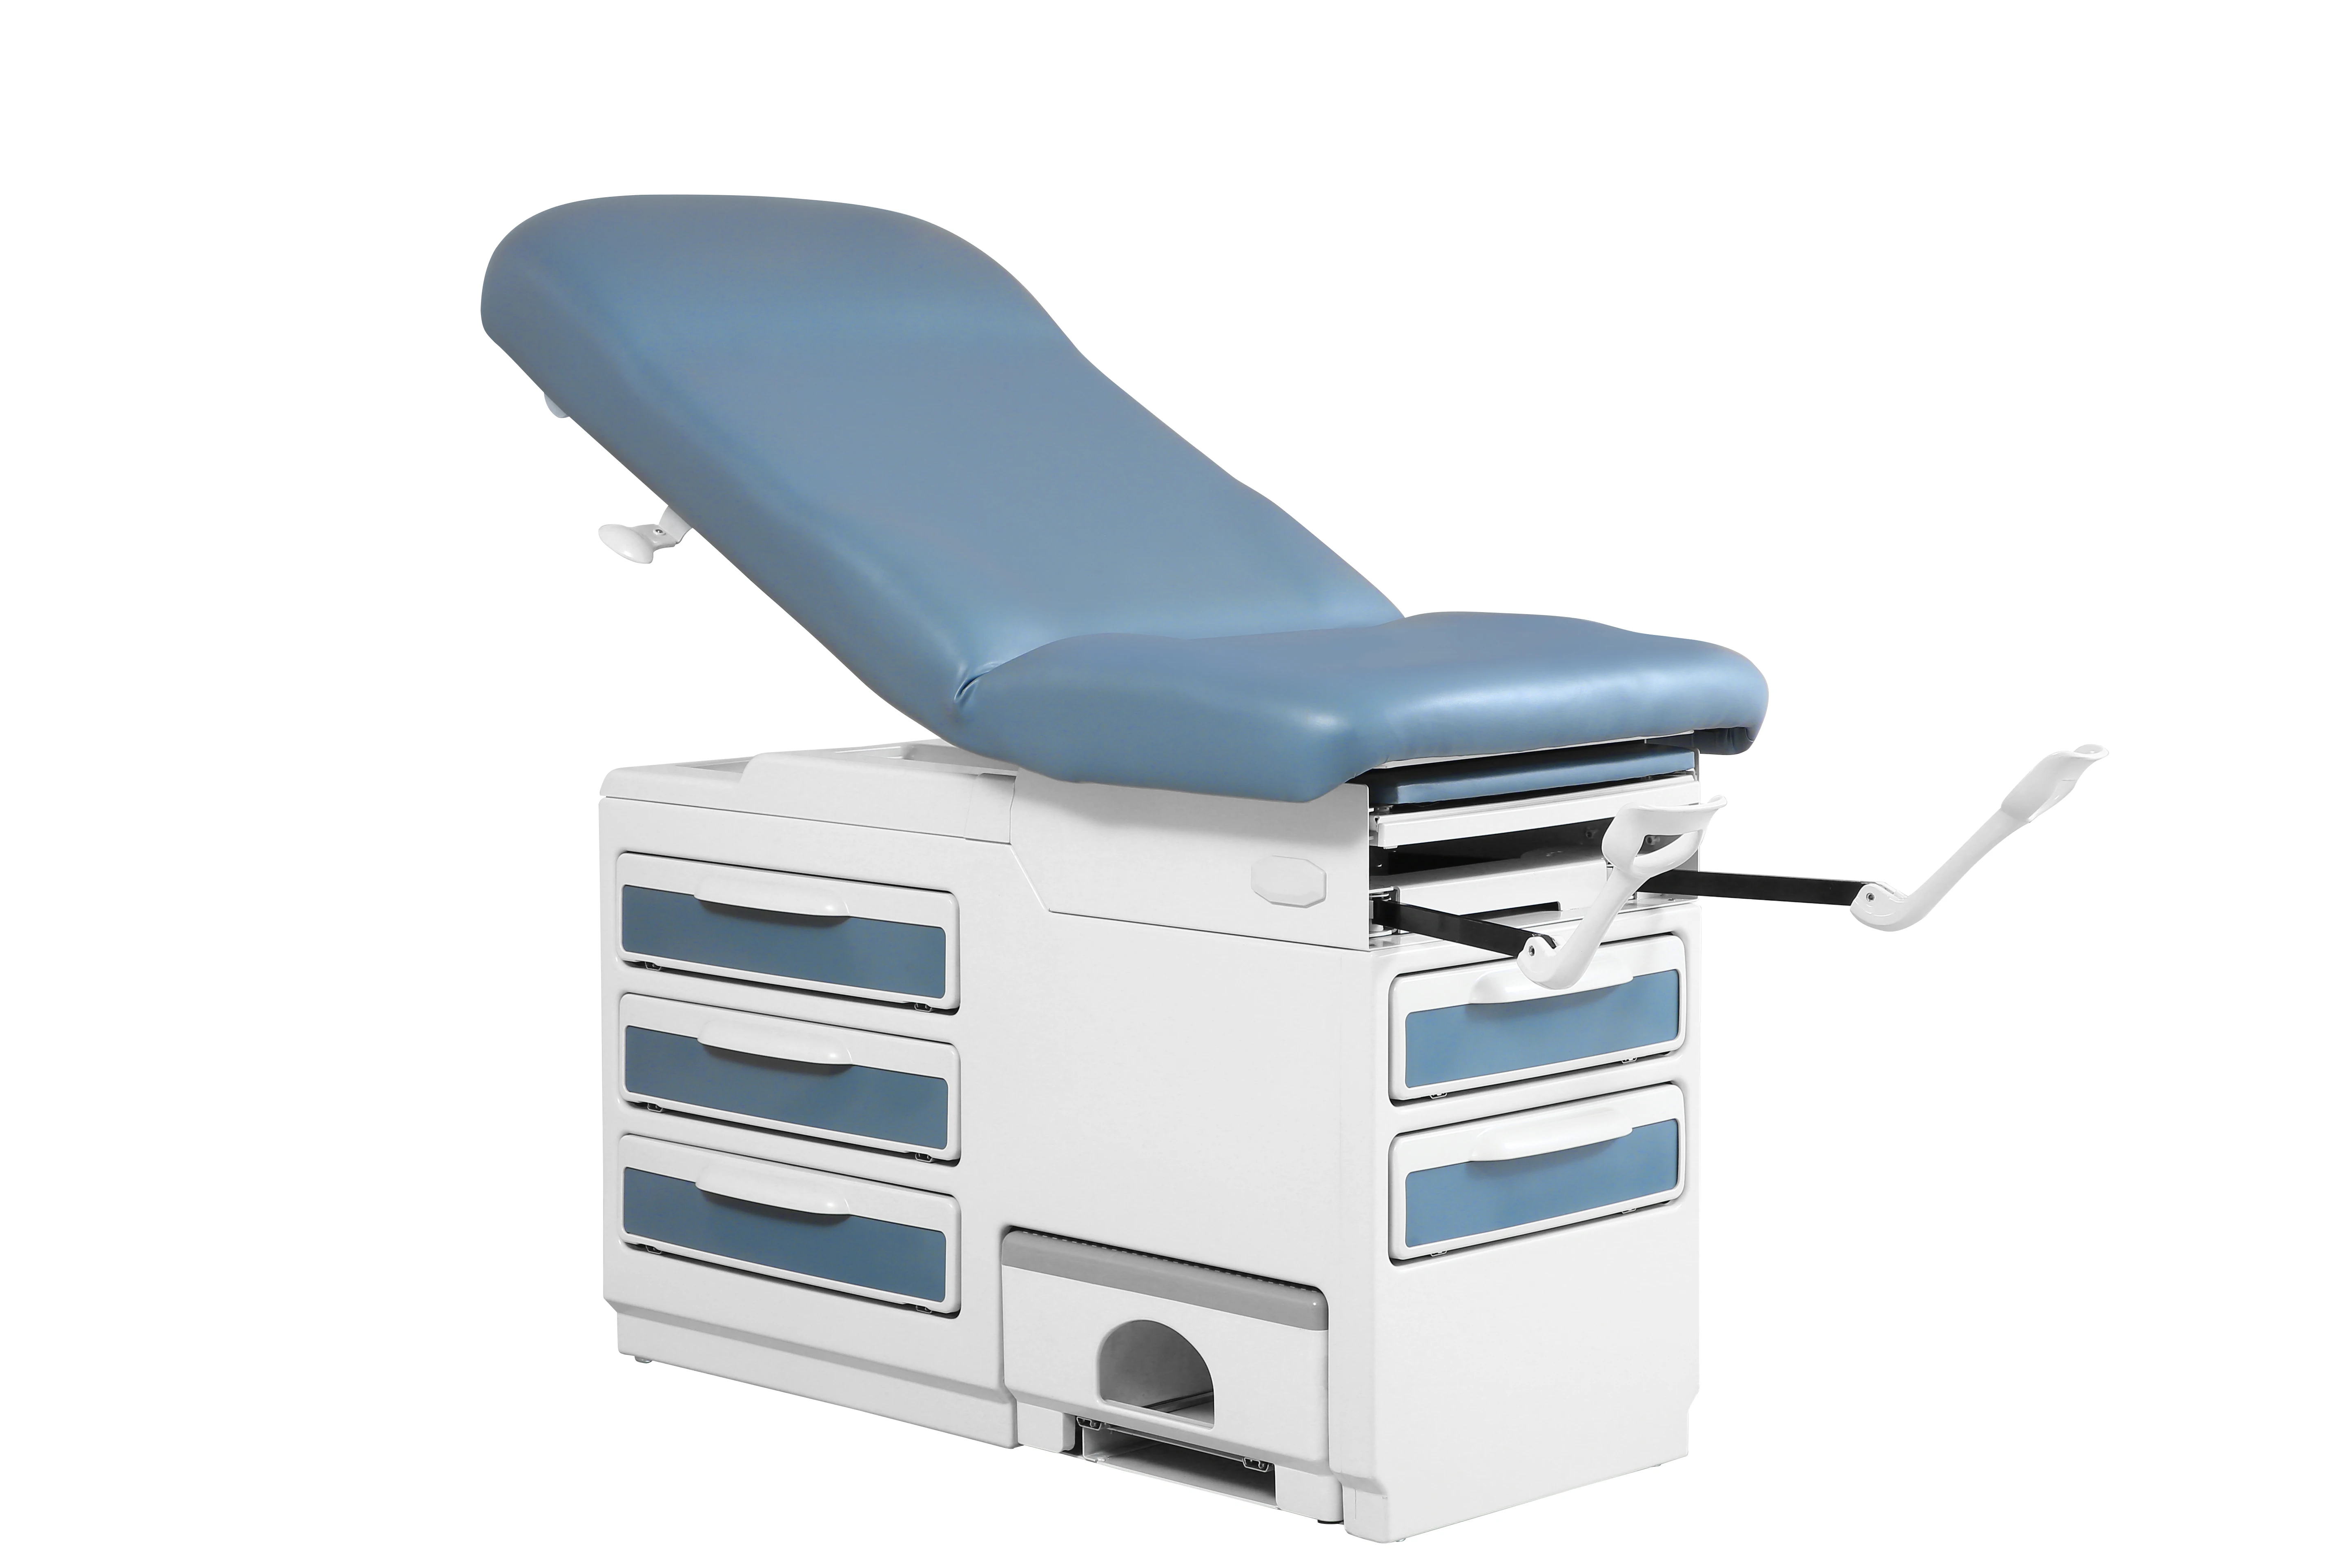 Adjustable delivery bed with drawers gynecological exam table Medical Gynecological obstetric delivery bed couch for wholesale